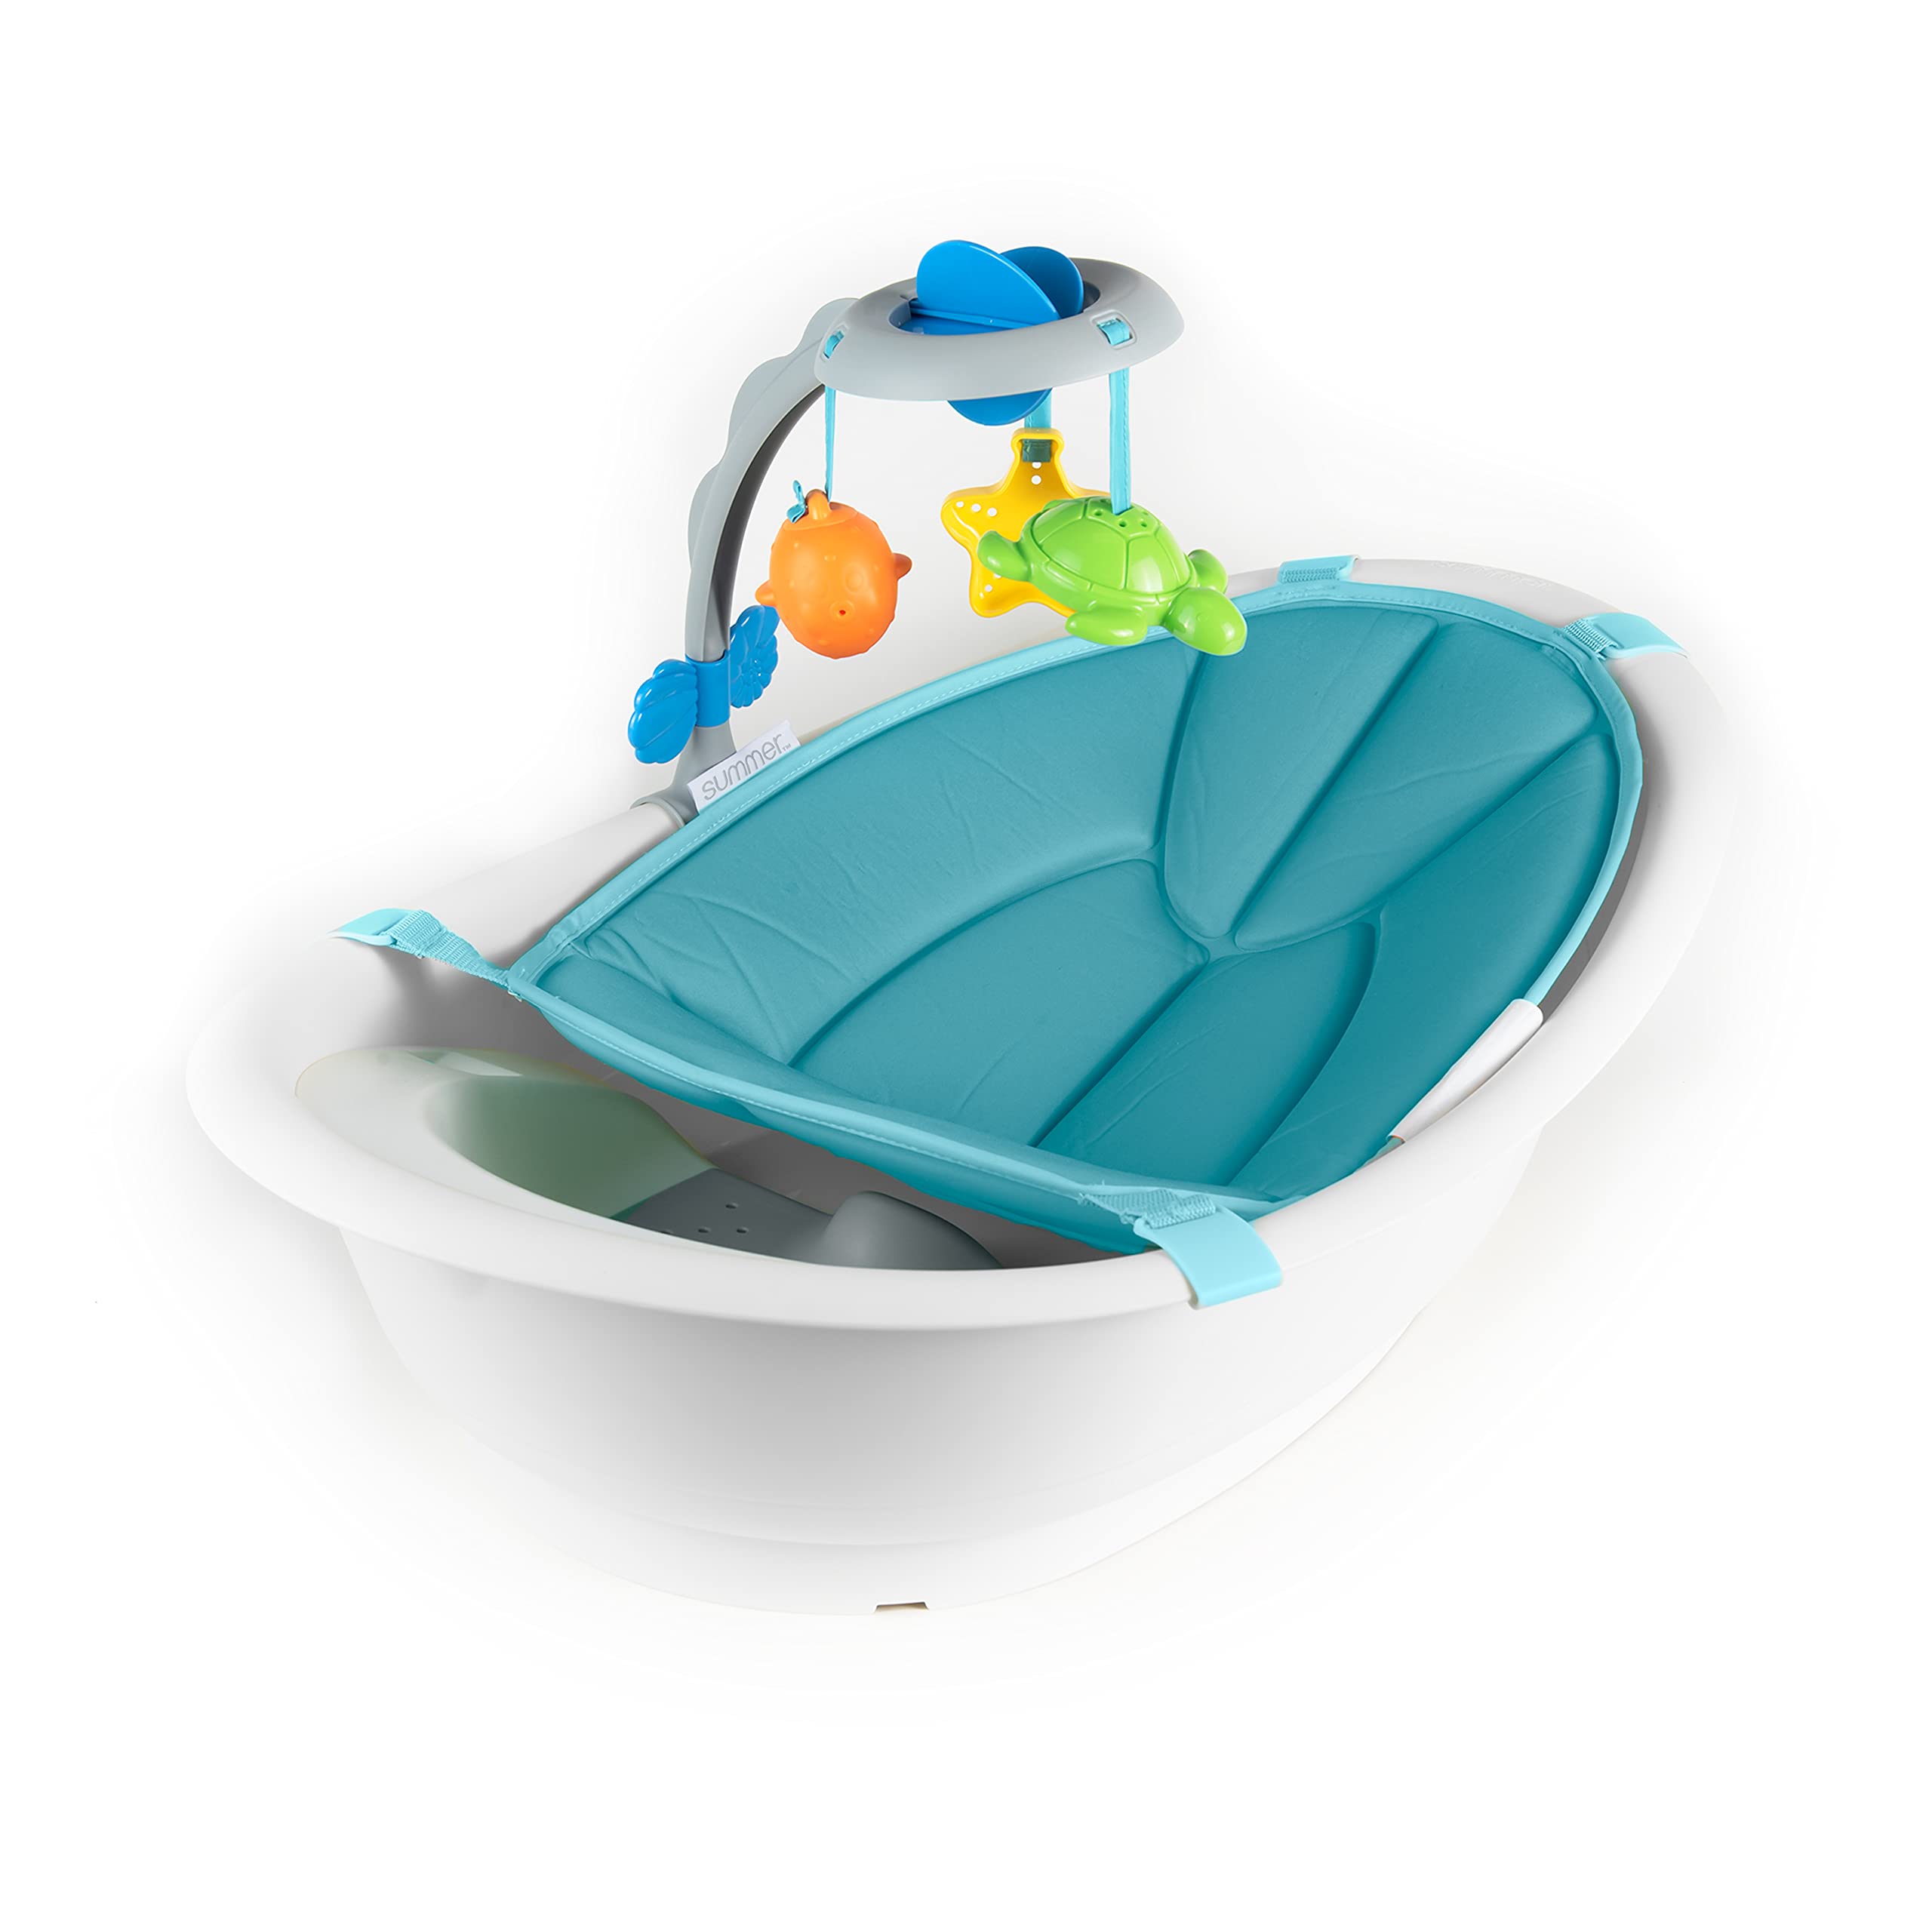 Summer Gentle Support Multi-Stage Tub with Toys - for Ages 0-24 Months - Includes Soft Support, Toy bar and Bath Toys, A Hook for Storage and Dying, and A Drain Plug, White/Blue, One Size